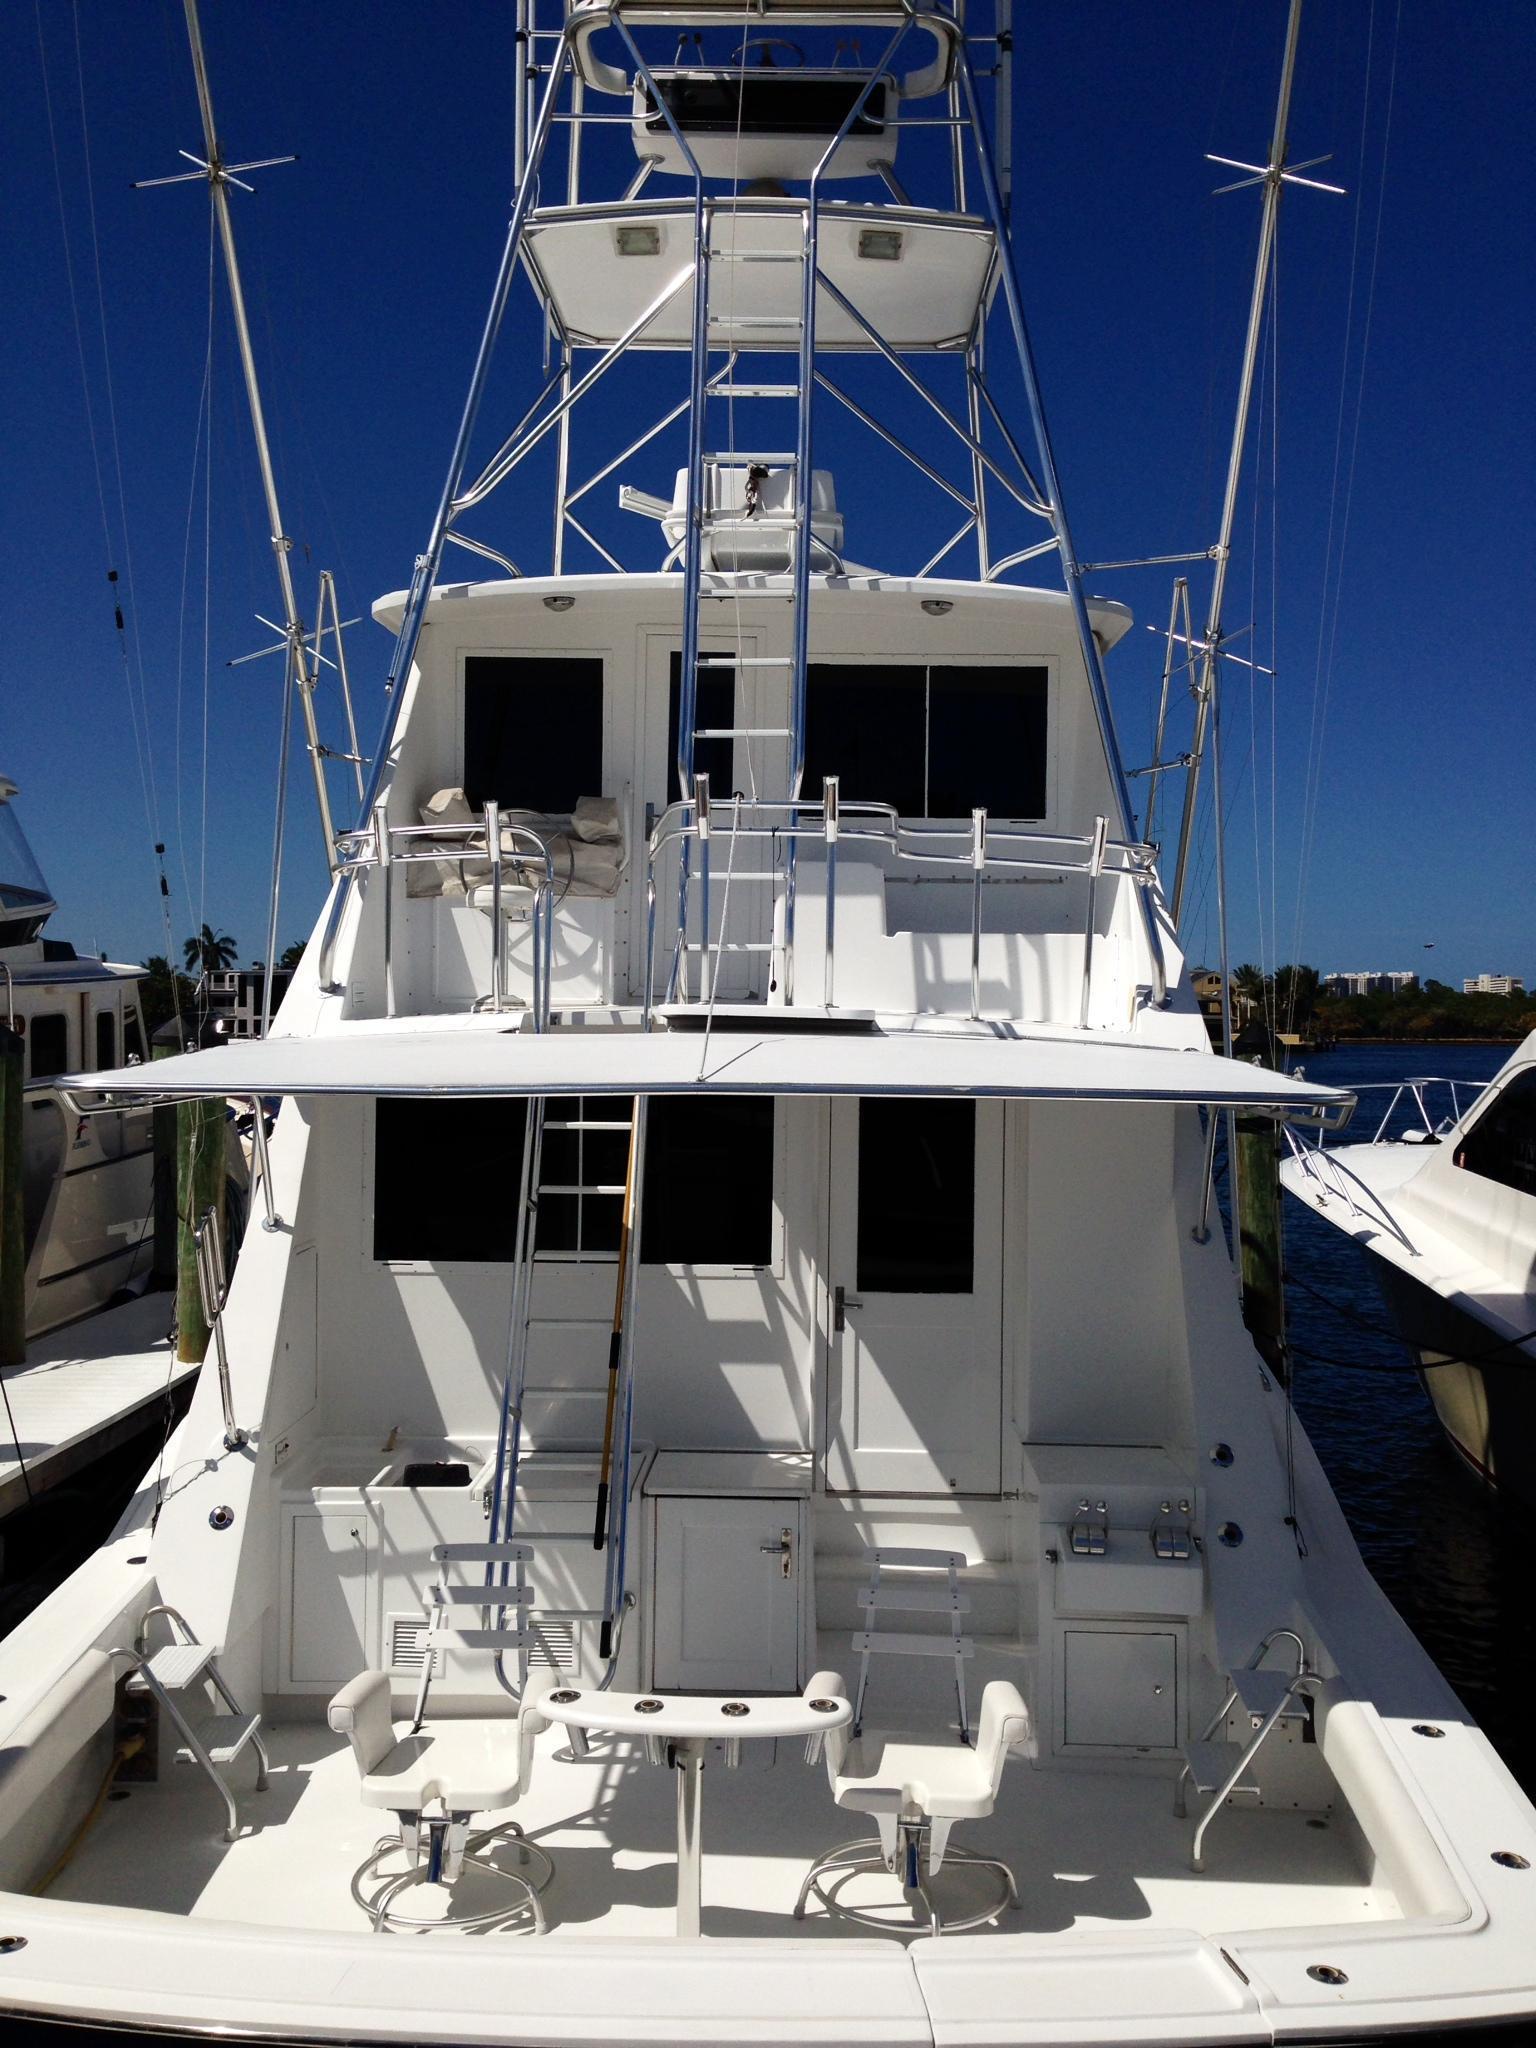 Hatteras Convertible Enclosed ybridge with Tower, Ft. Lauderdale